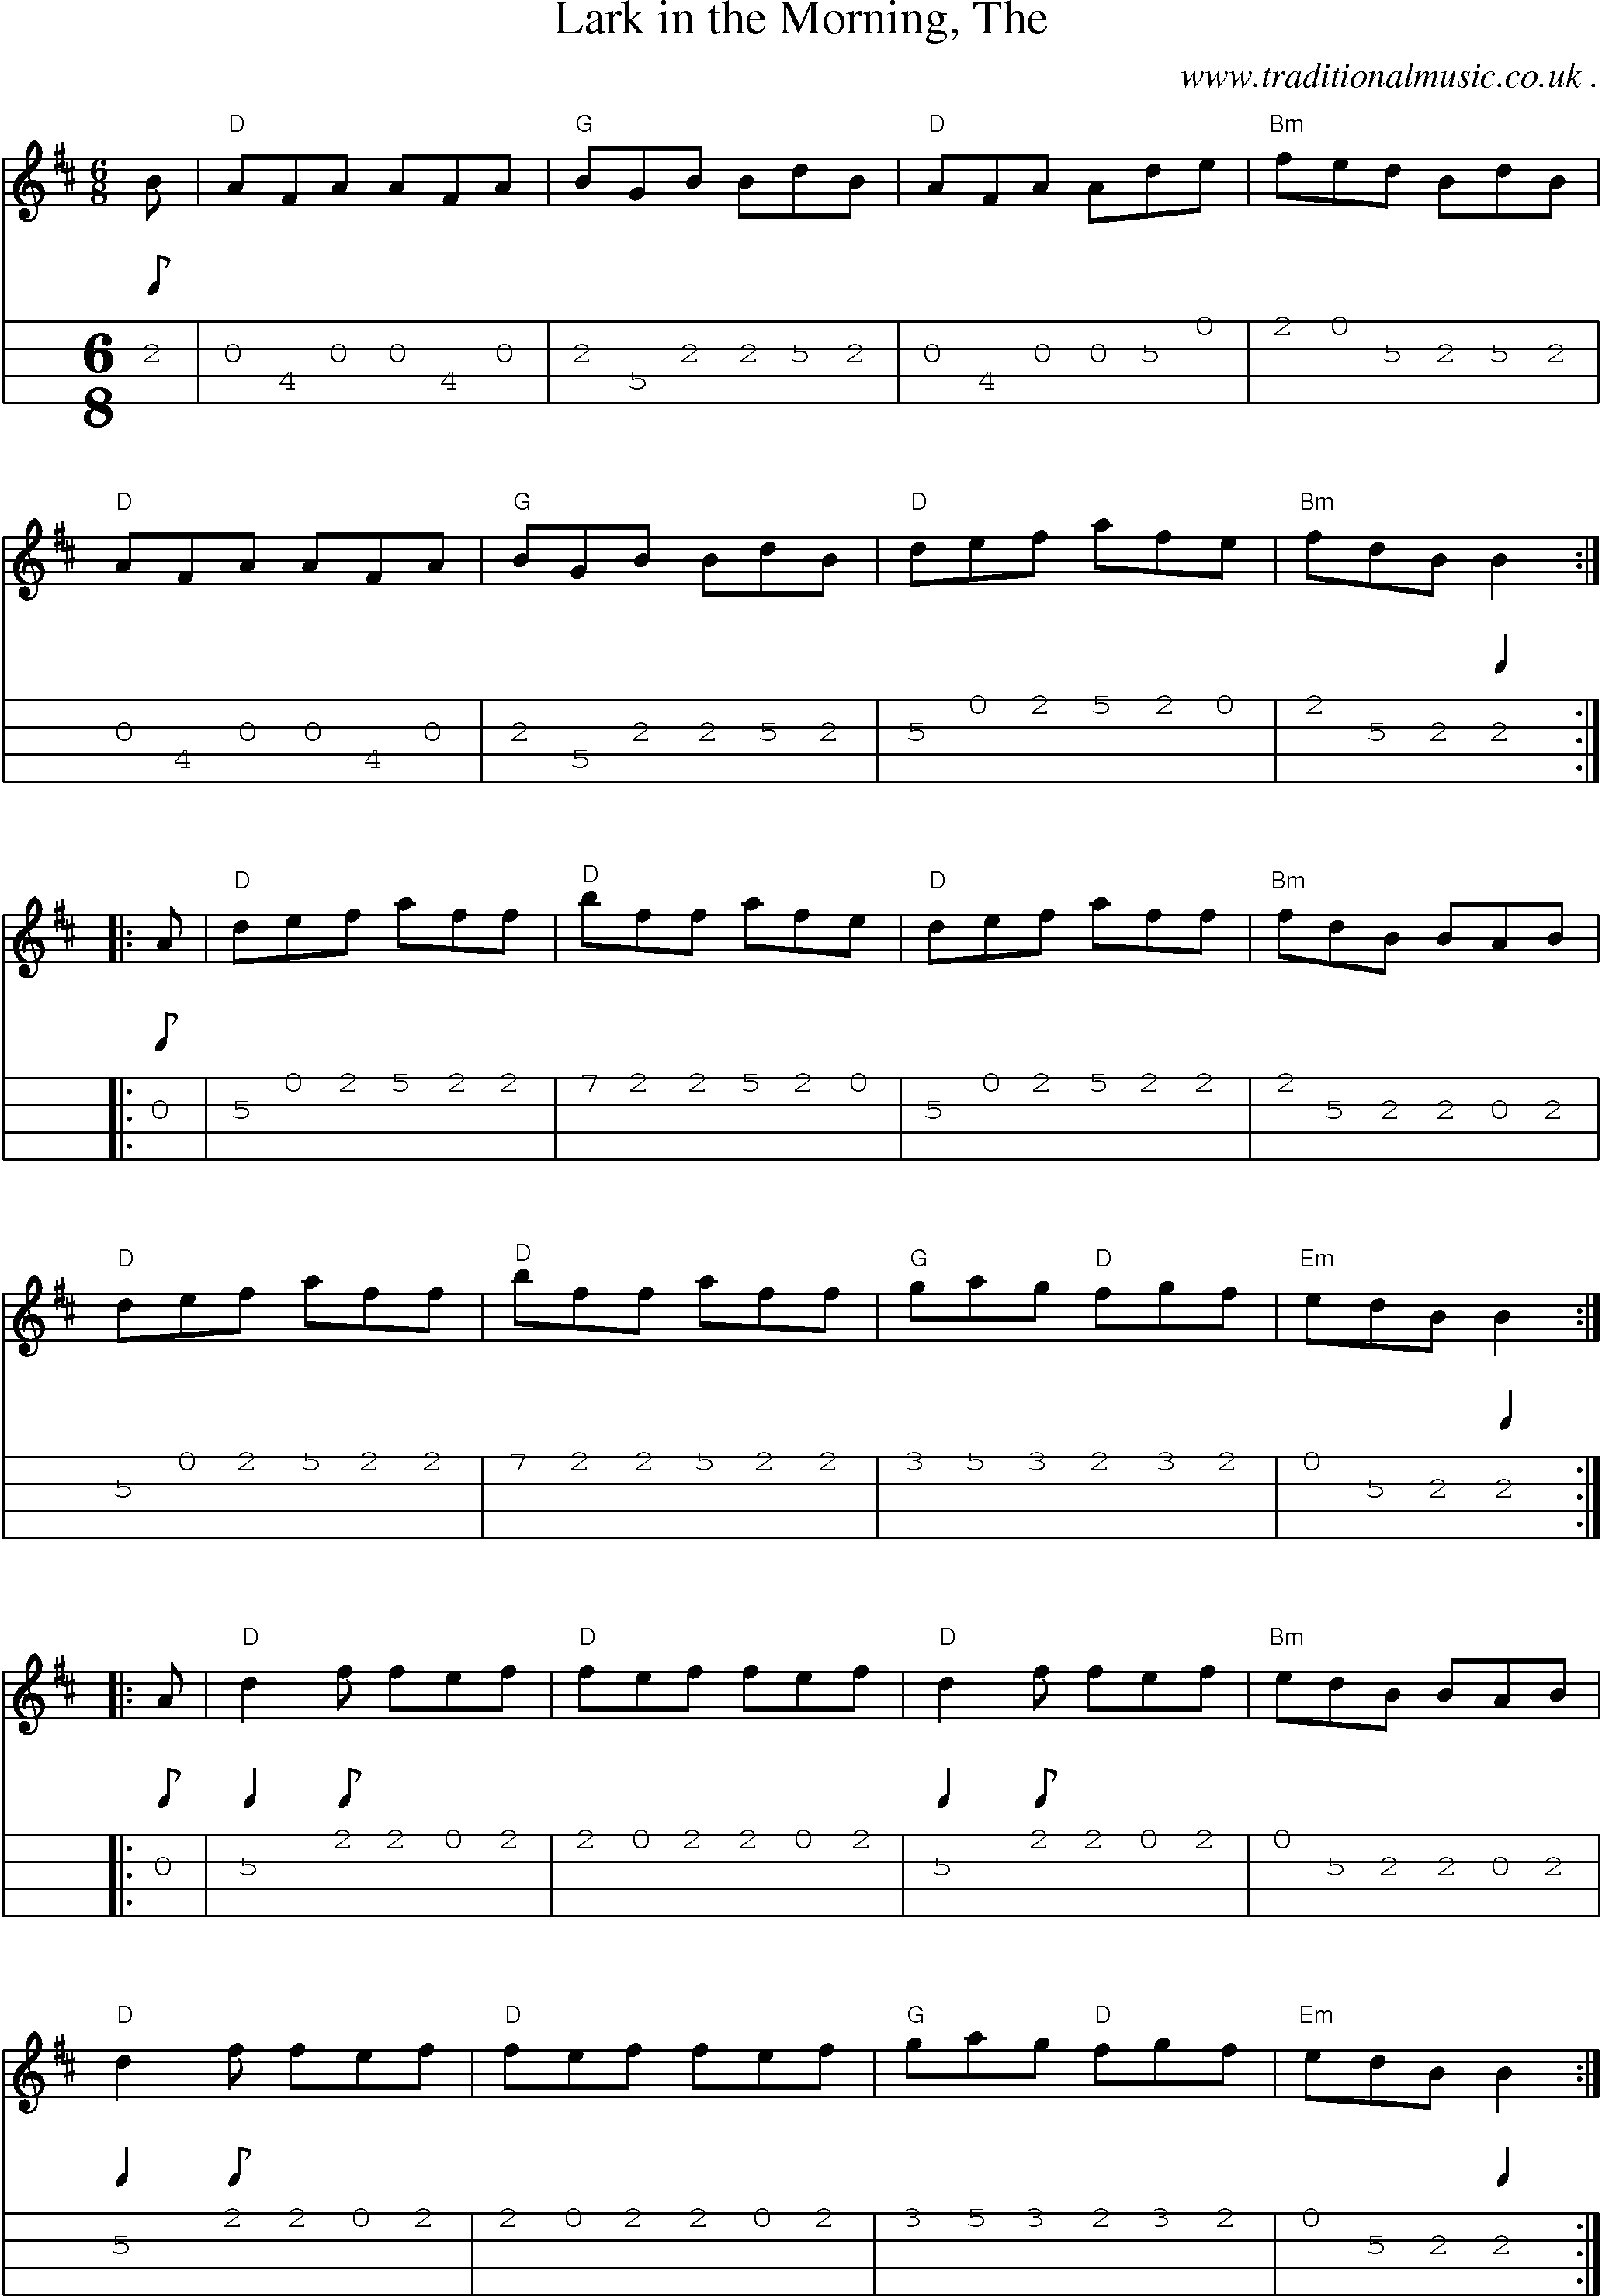 Music Score and Guitar Tabs for Lark in the Morning The